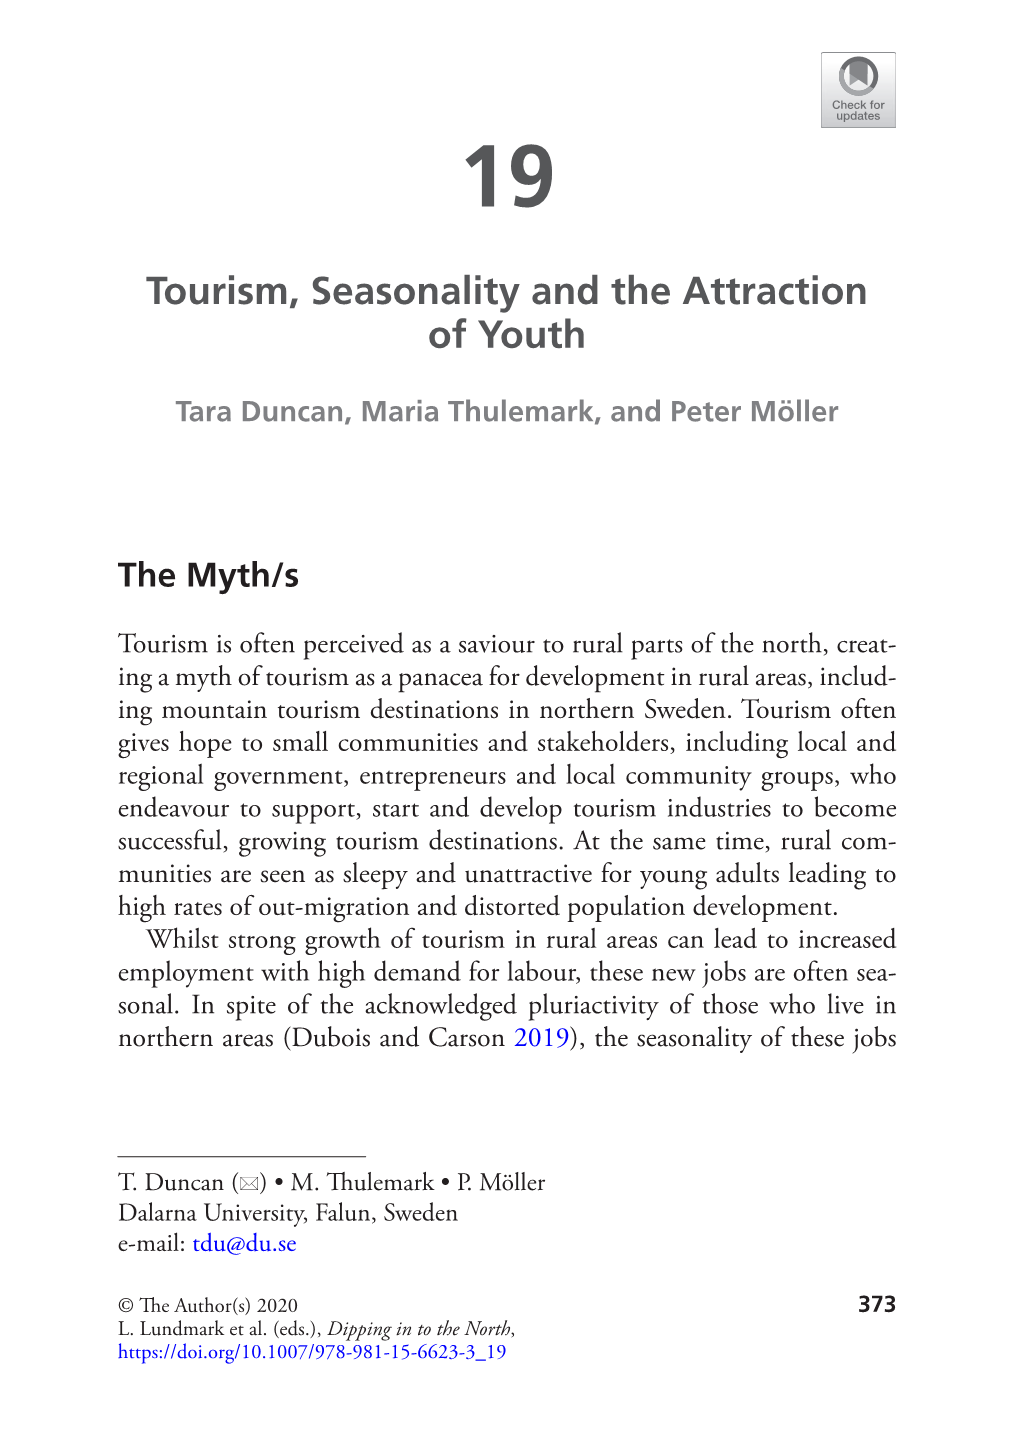 Tourism, Seasonality and the Attraction of Youth